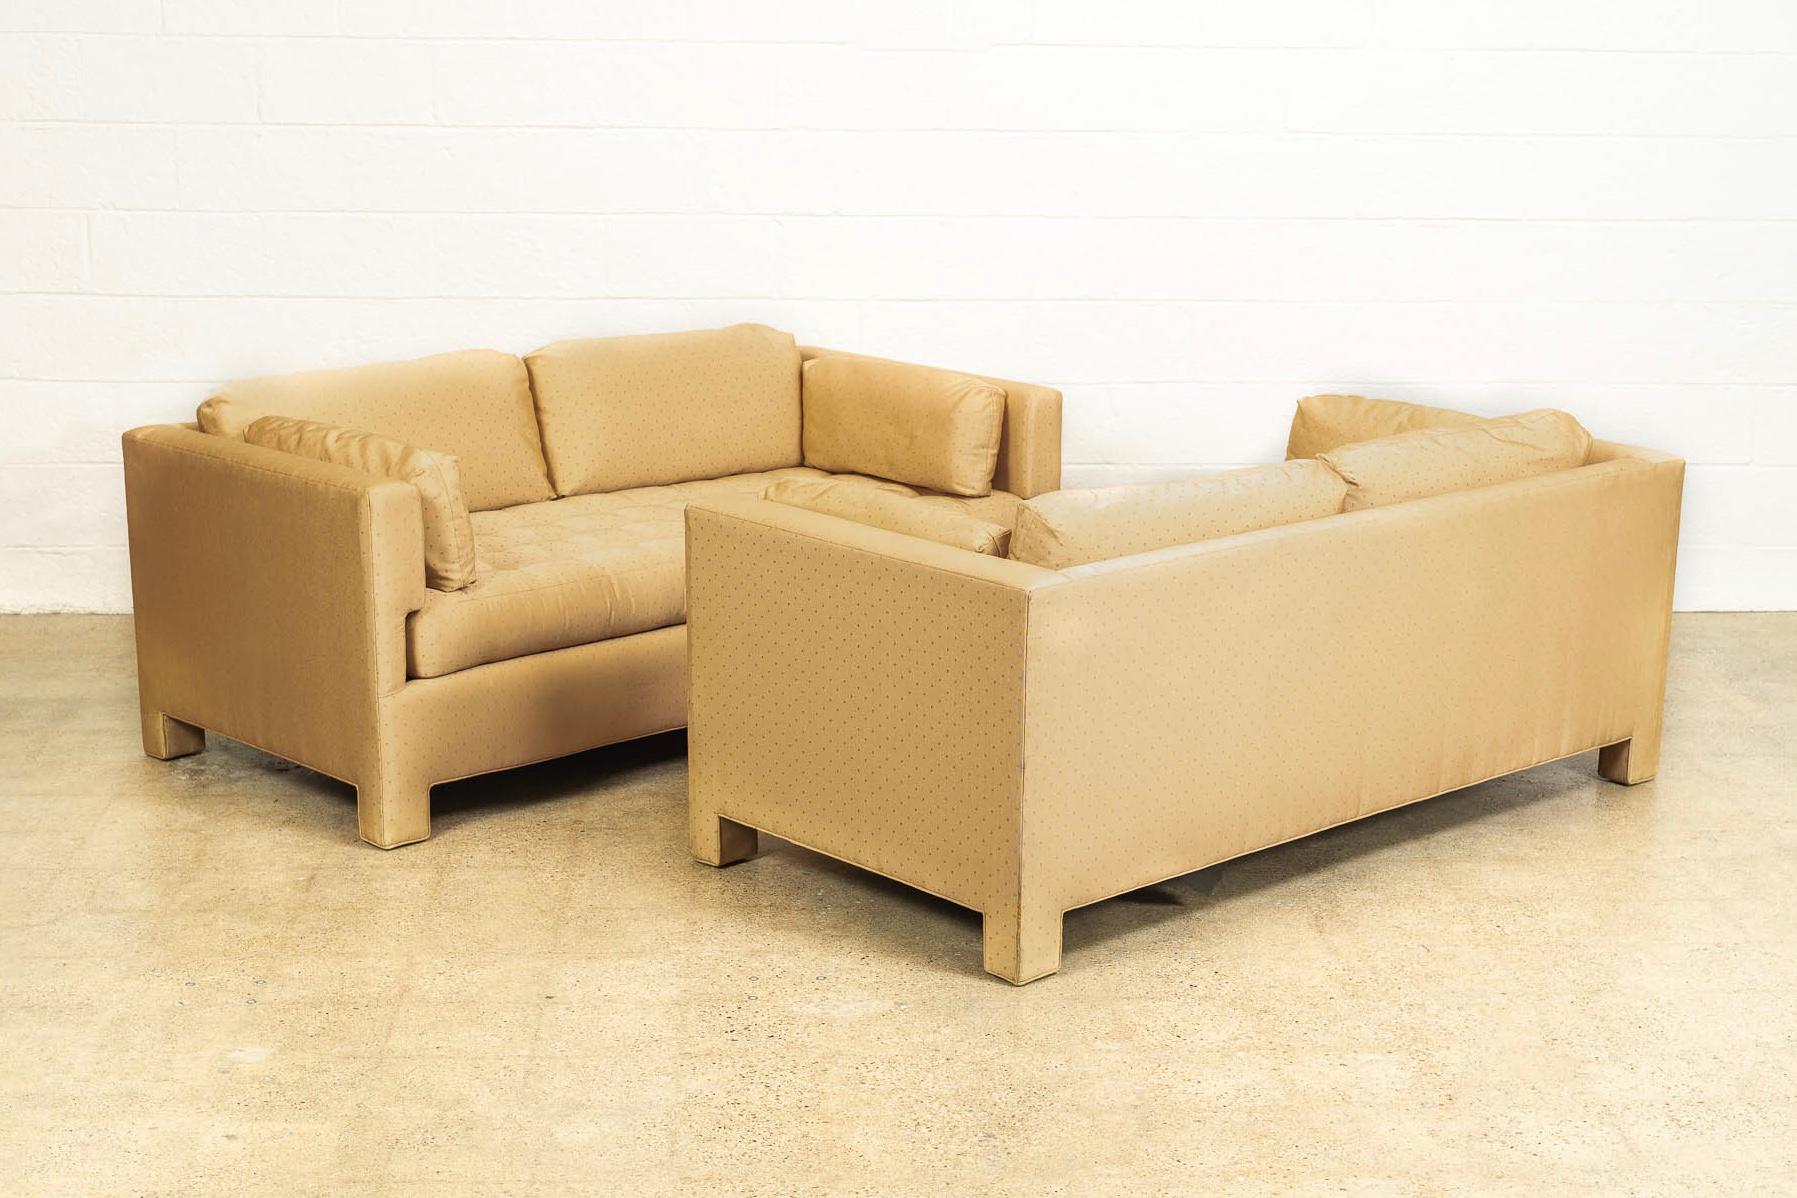 American Midcentury Probber or Wormley Style Tan Upholstered Sofa Couches, a Pair